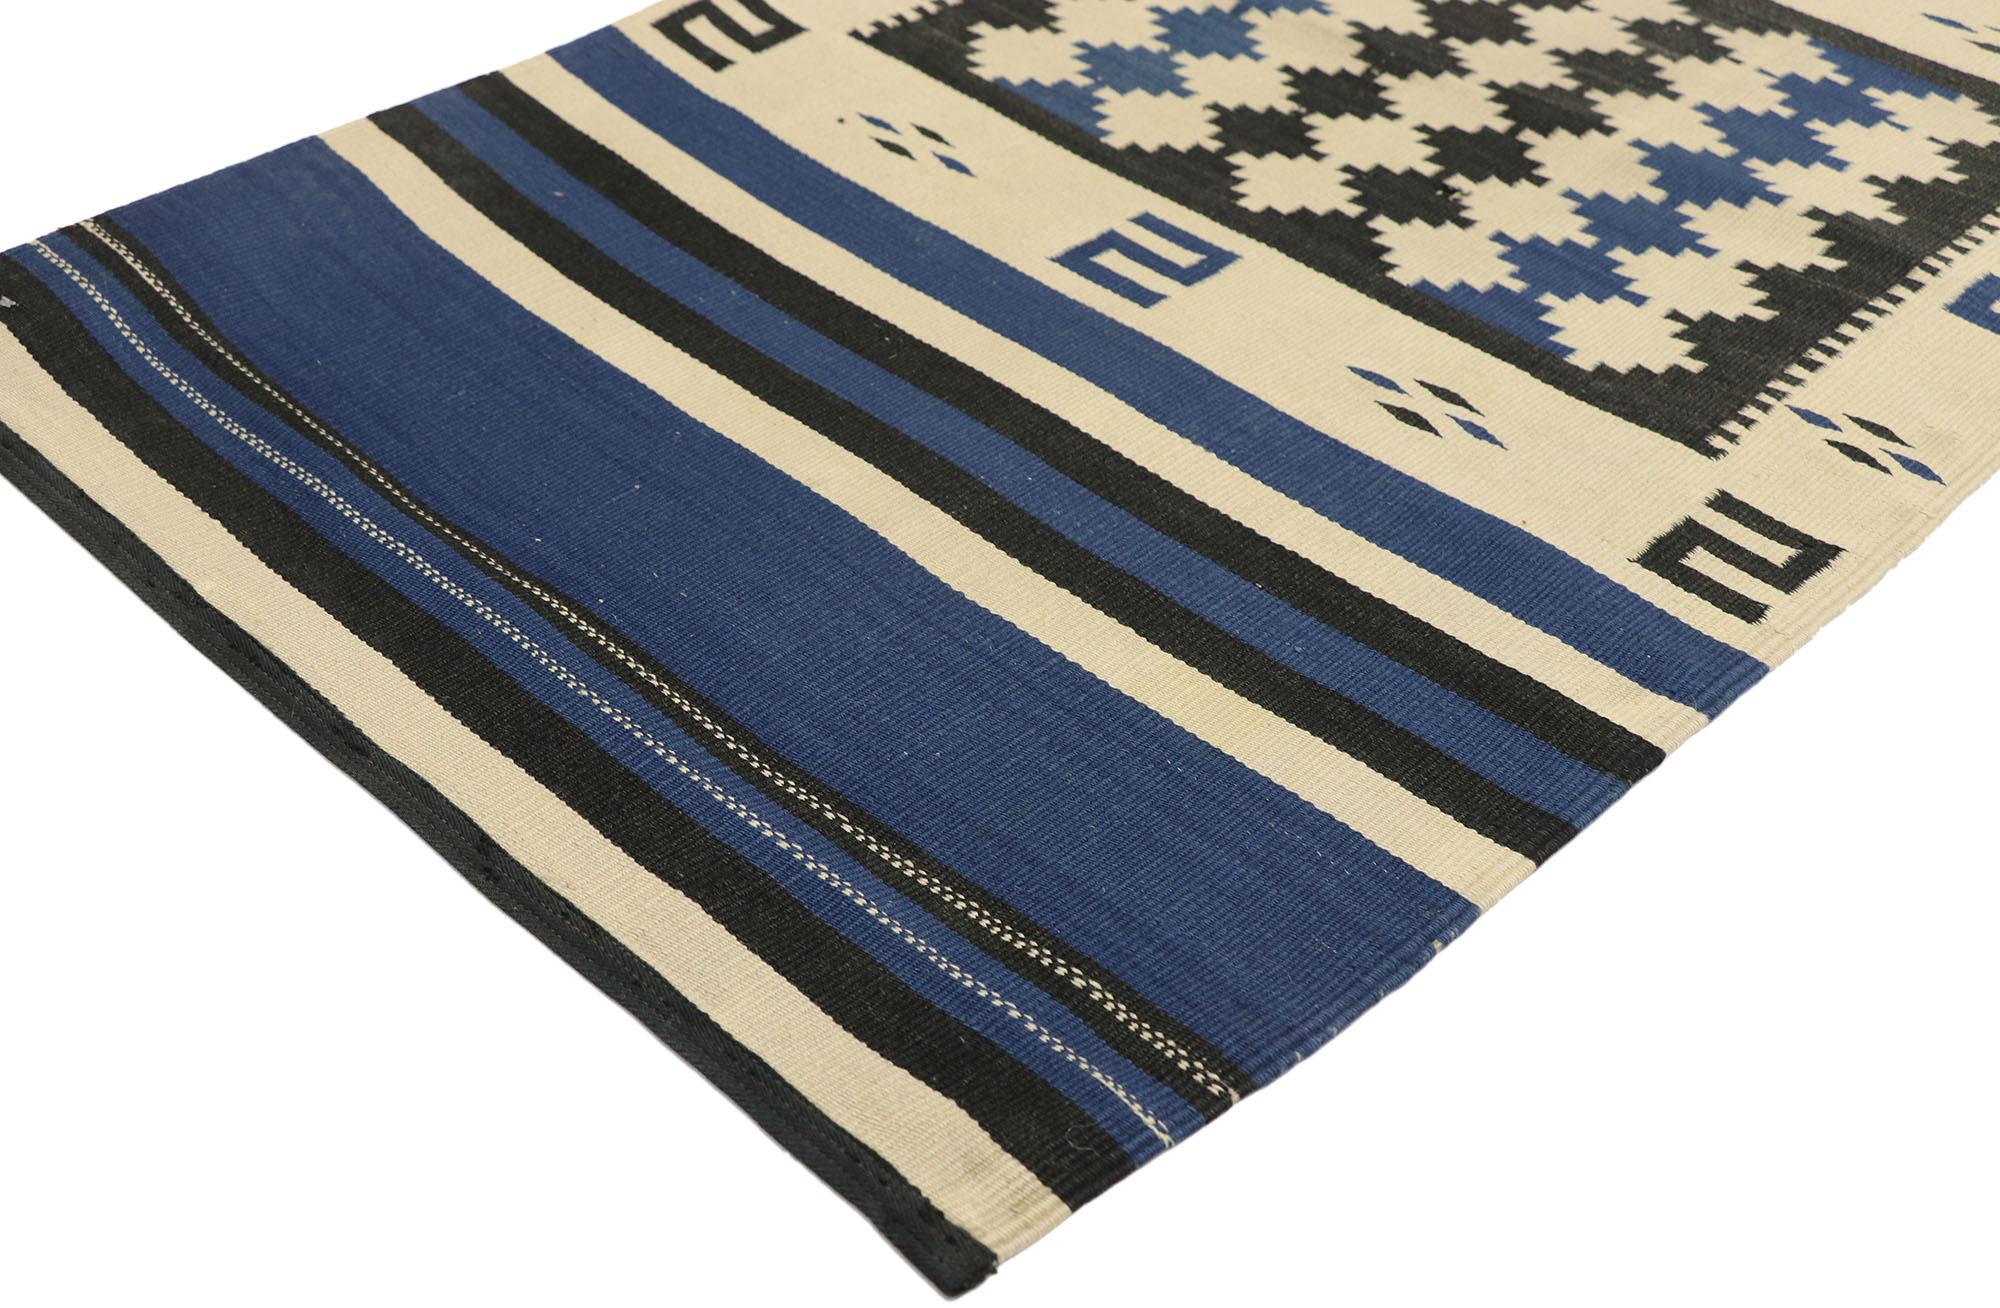 72550 Native American Antique Indian Navajo Kilim Rug, Navajo Saddle Blanket 02'01 x 04'01. This hand-woven wool Native American antique Indian Navajo kilim rug features a large black square filled with stepped diamonds in the center flanked with